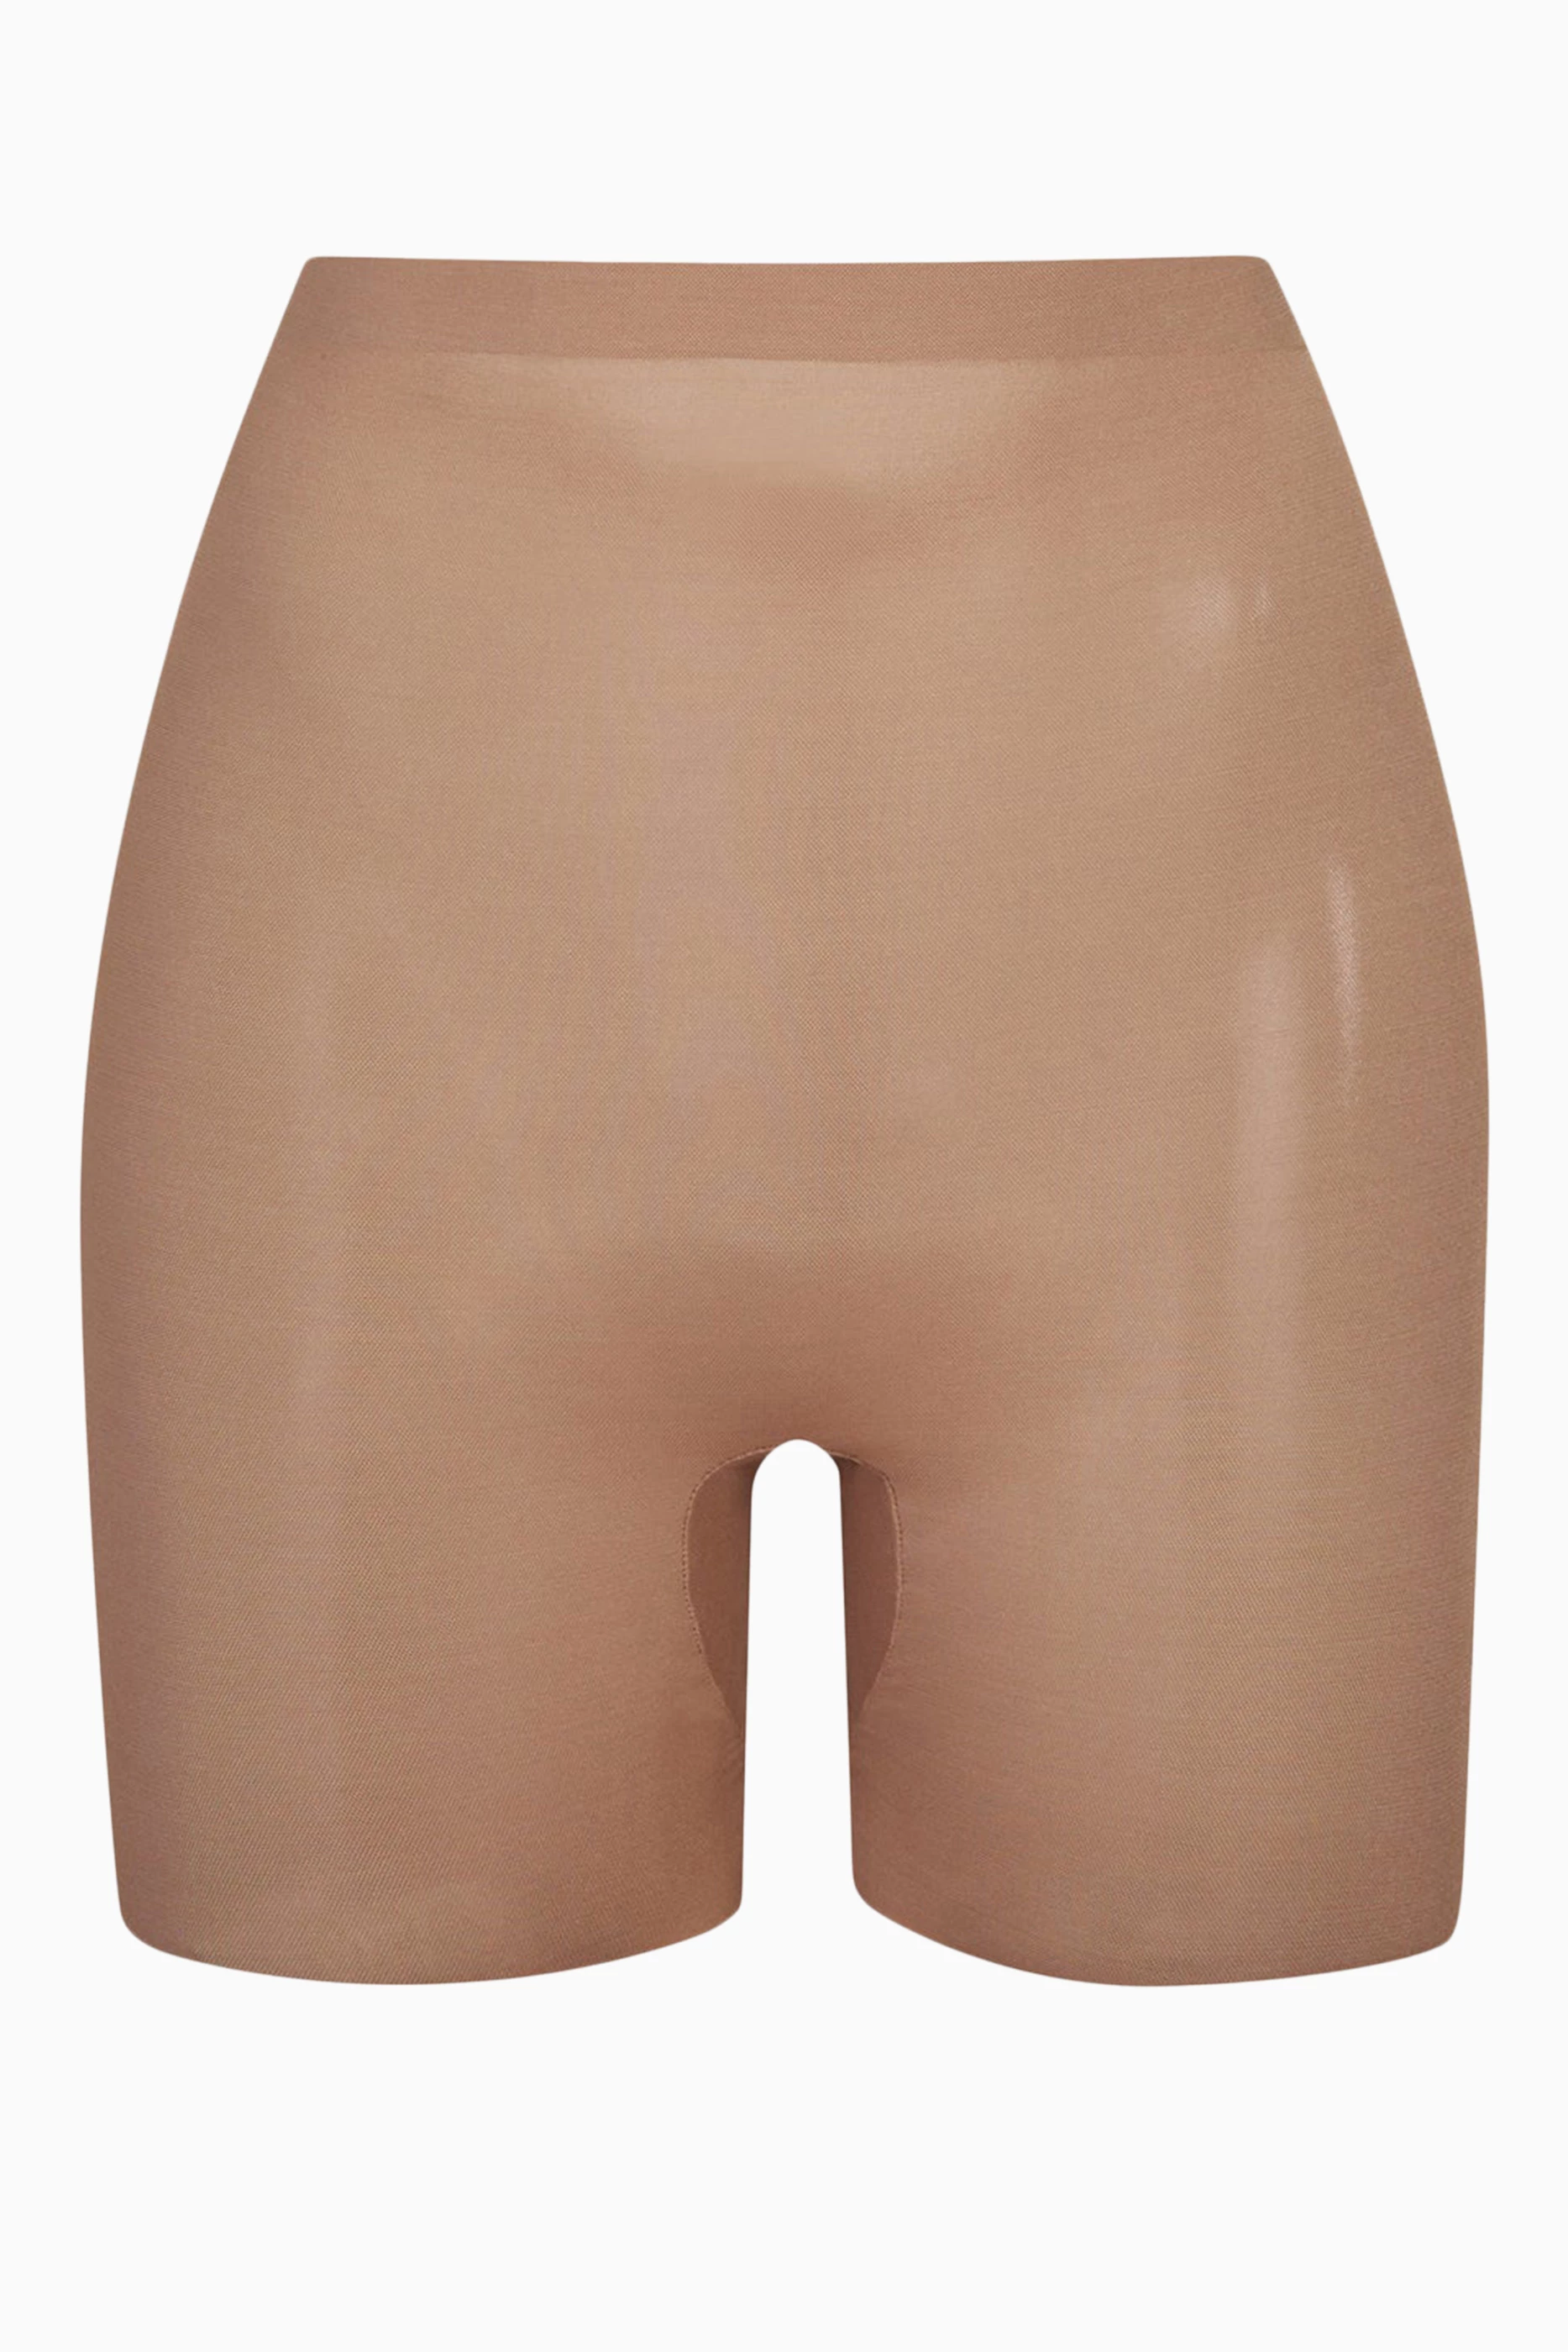 Buy Brown Barely There Shapewear Low Back Short for WOMEN Arabia